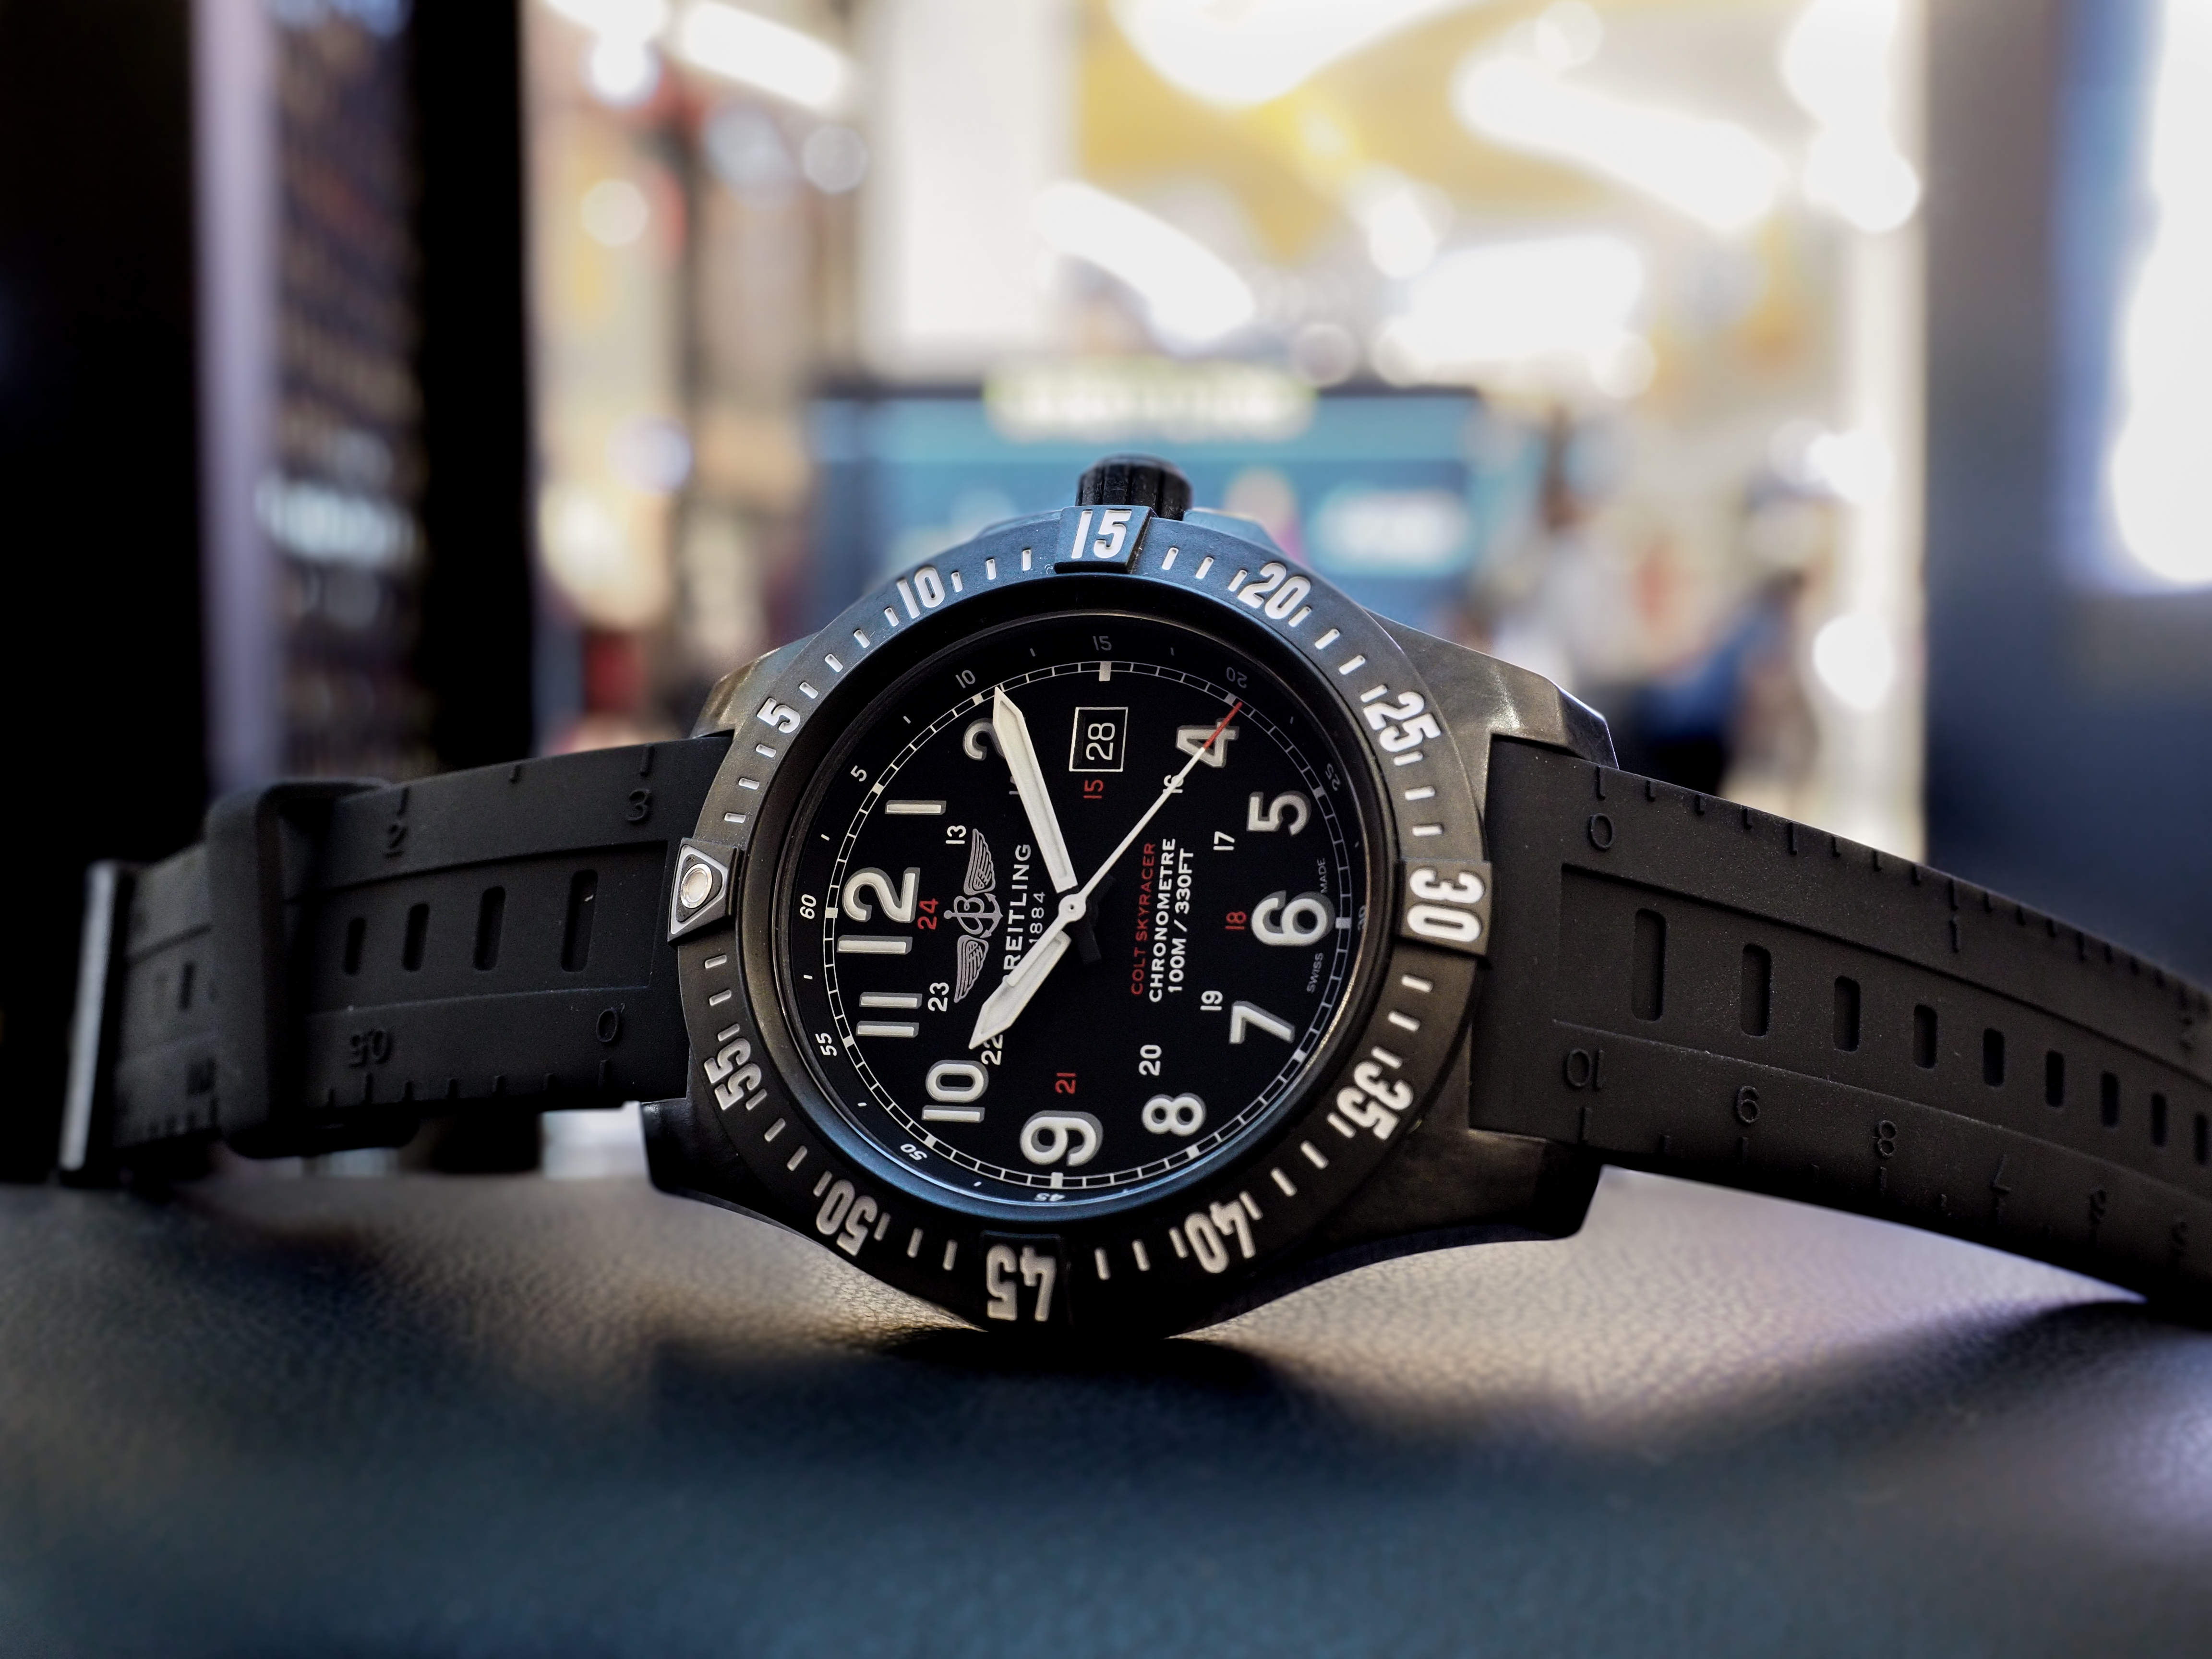 Hands on with the Breitling Colt Skyracer